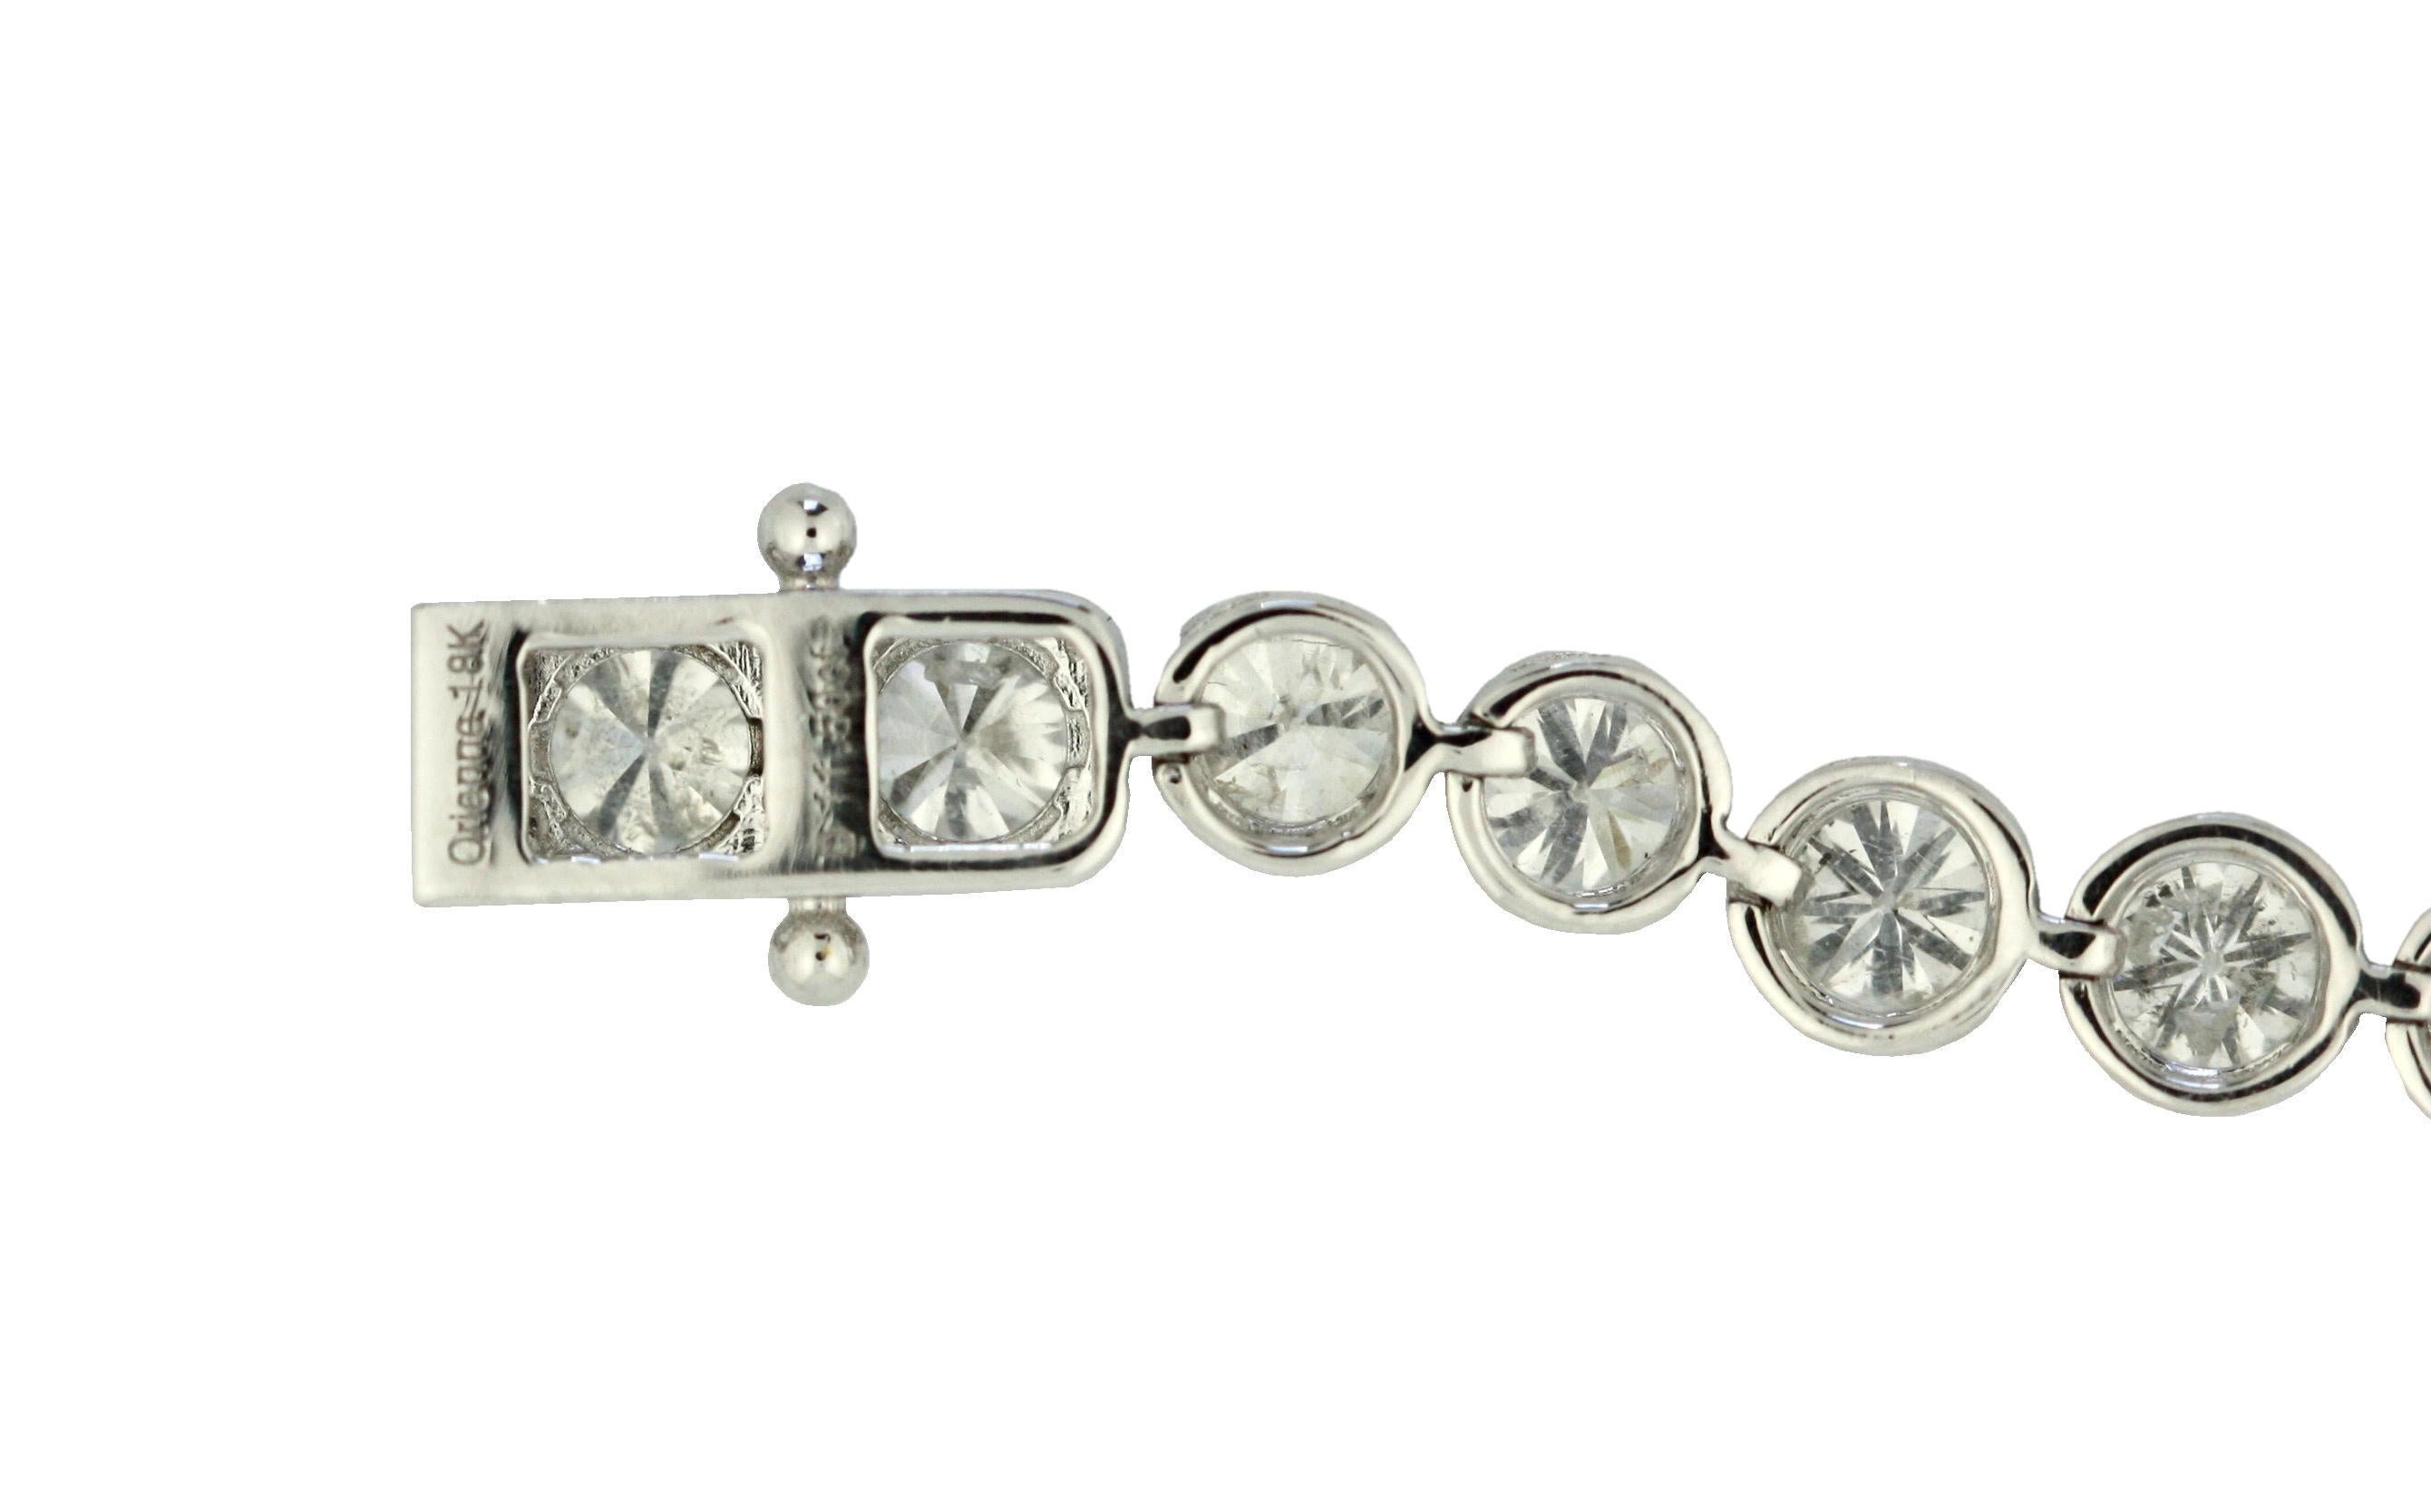 DIAMOND BRACELET 
The tennis bracelet composed of brilliant-cut diamonds together weighing approximately 11.50 carats, mounted in 18 karat white gold, length approximately 7 inches